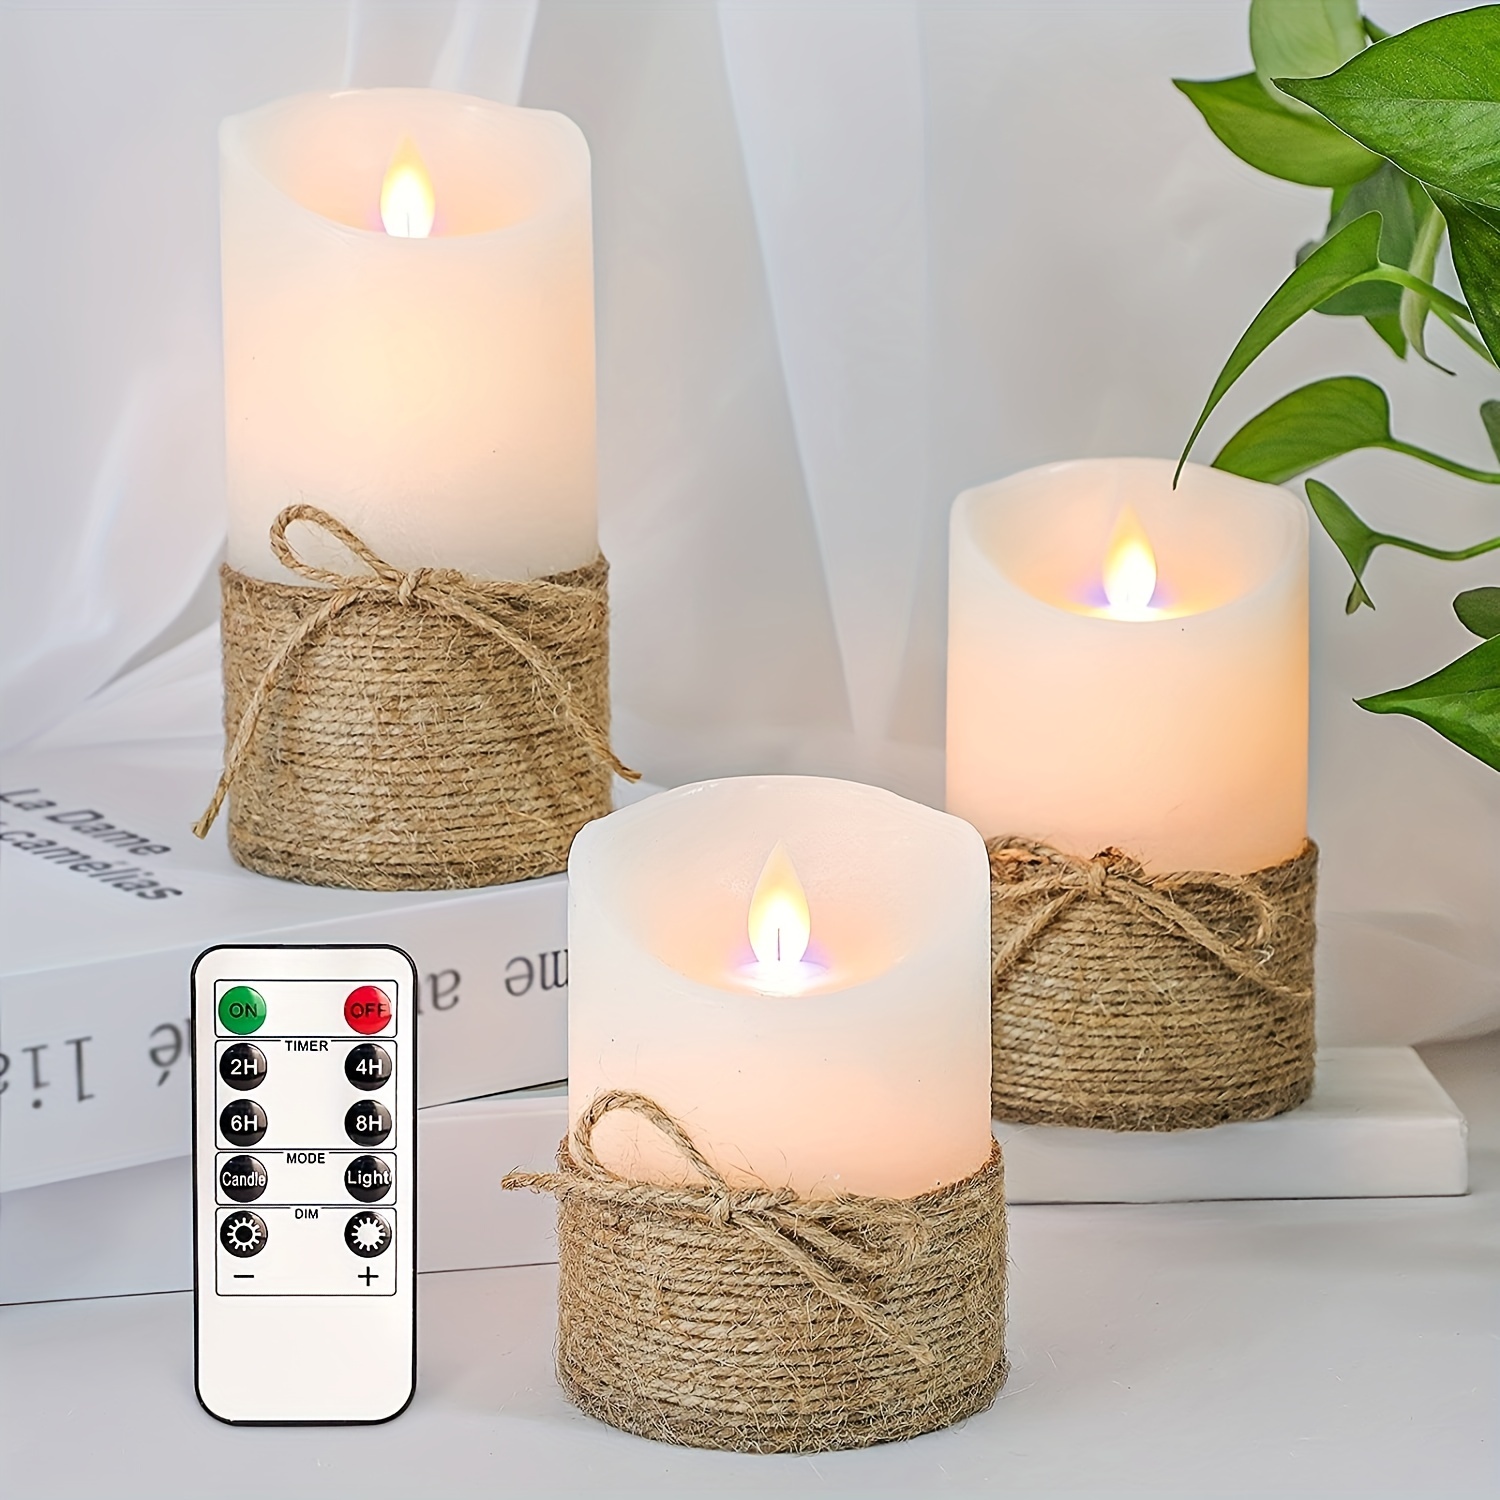 Believe it or not these beautiful candles in a shell shape are now  available at Kmart @hallsheadcentral for $5 (2pack) @kmartaus . Swipe